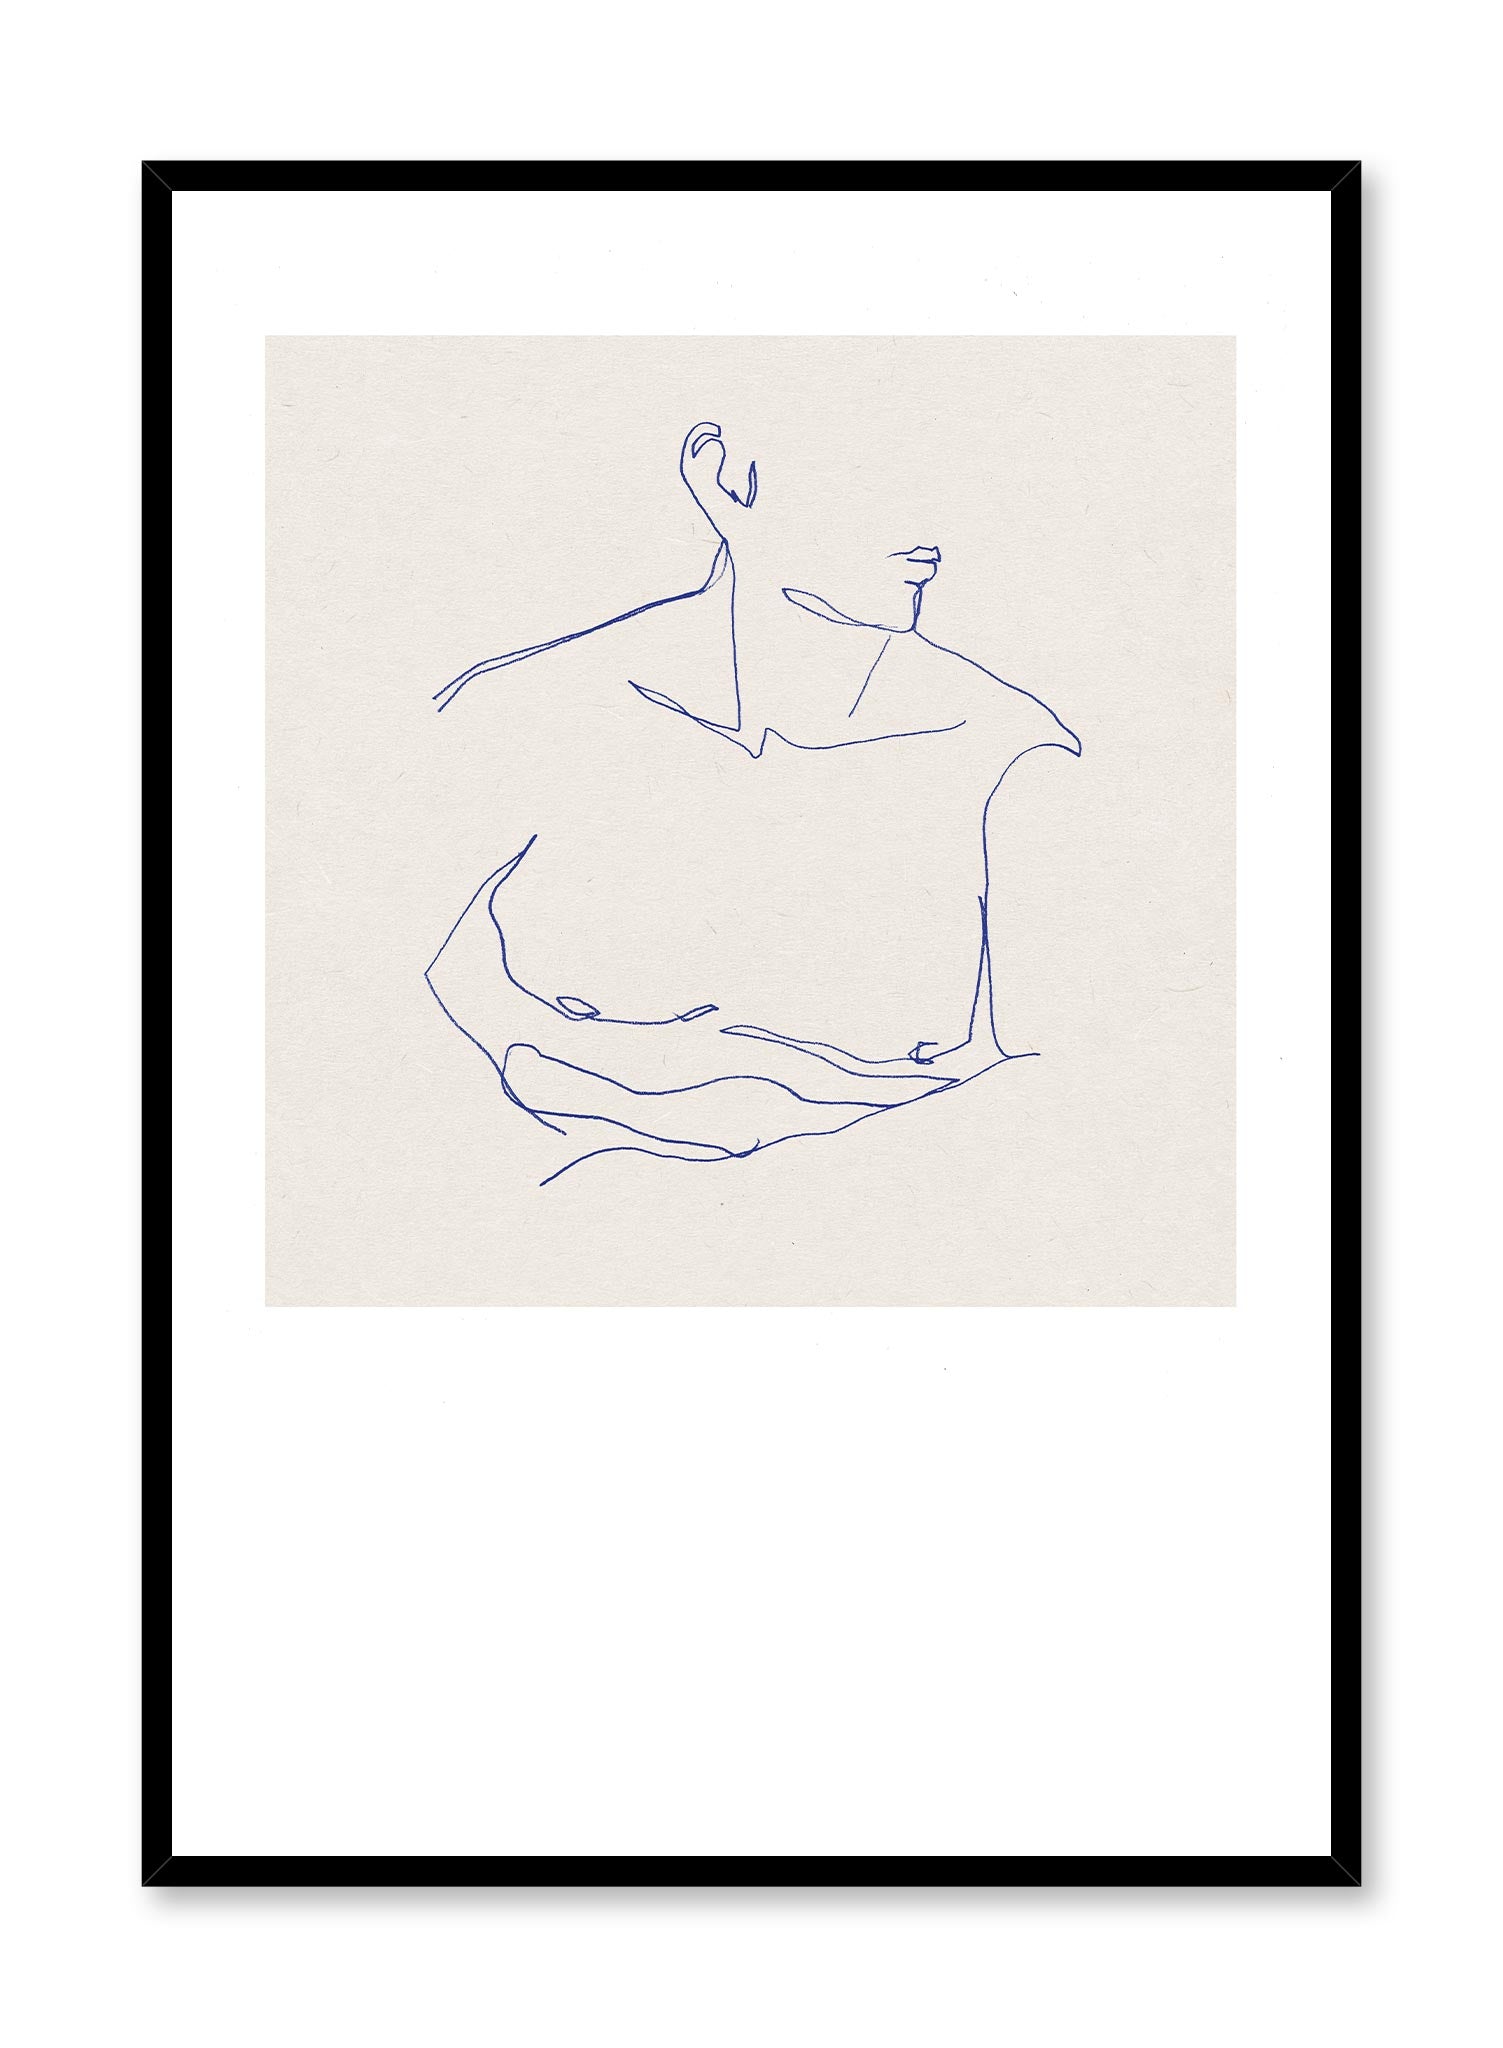 Him is a line art illustration of a man's chiseled chest by Opposite Wall.